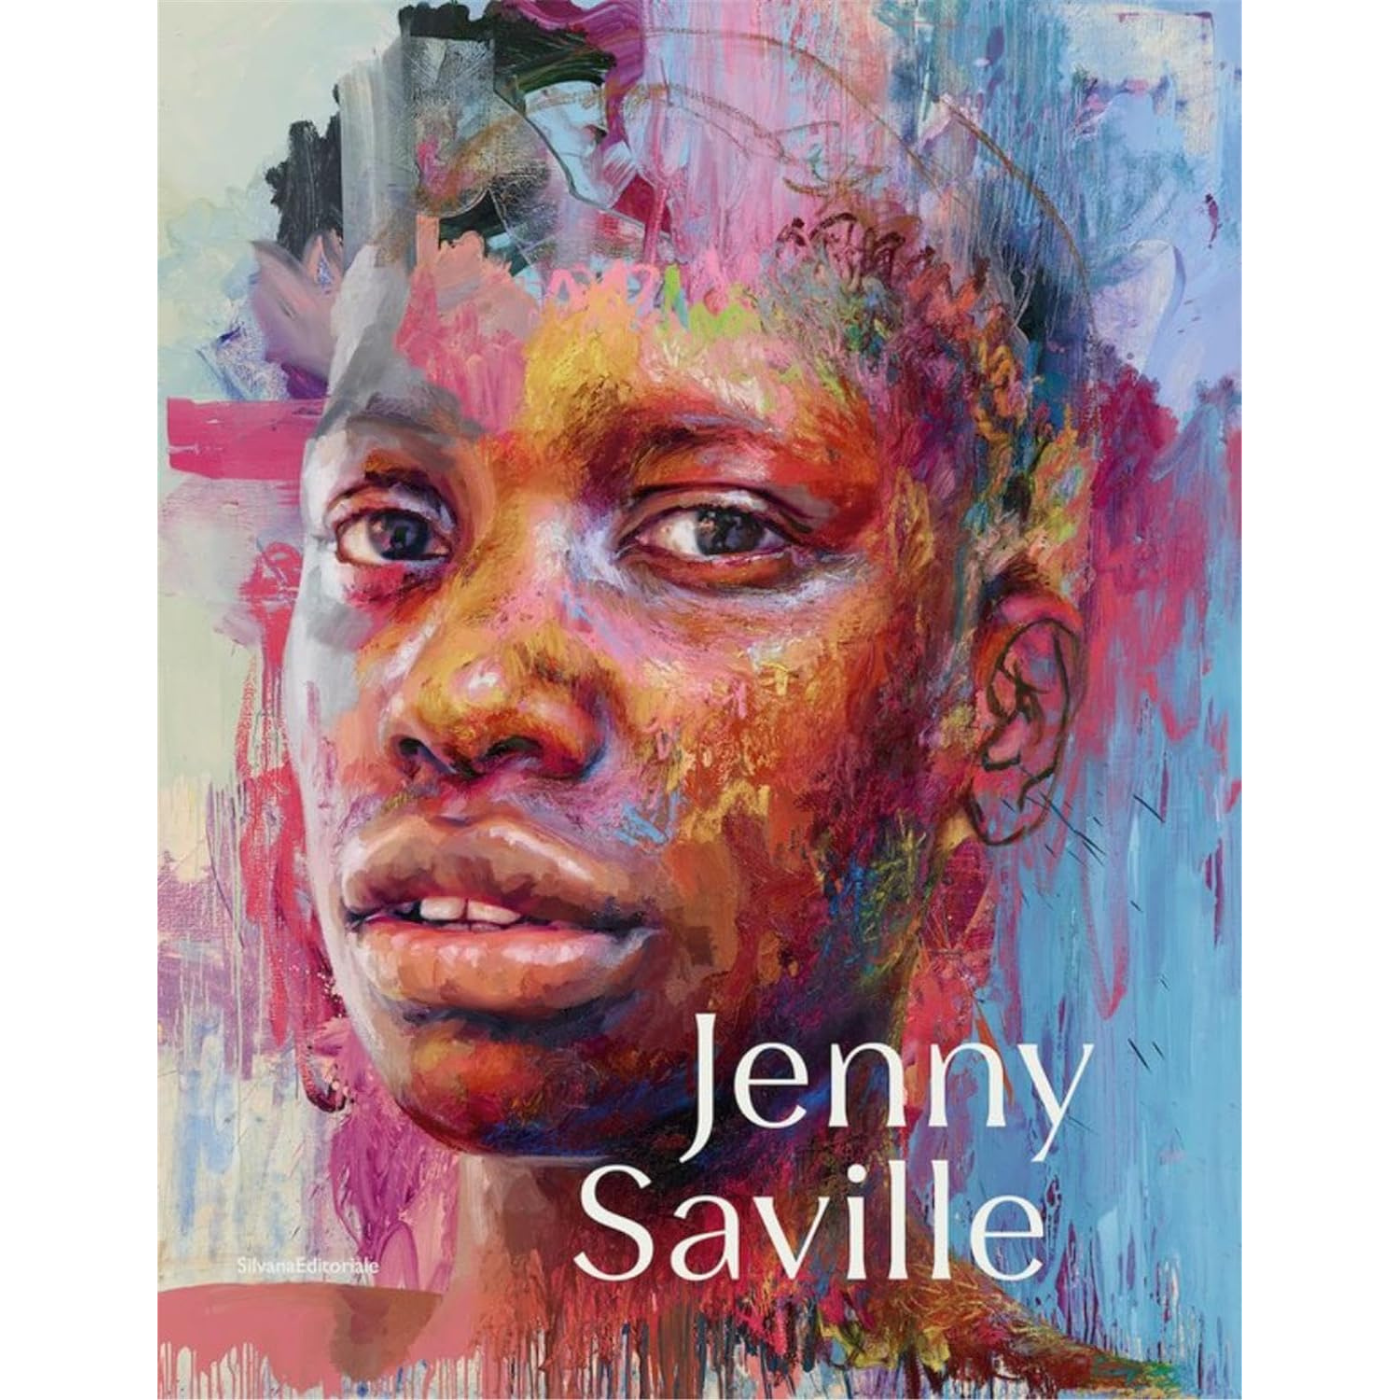 Jenny Saville book front cover.